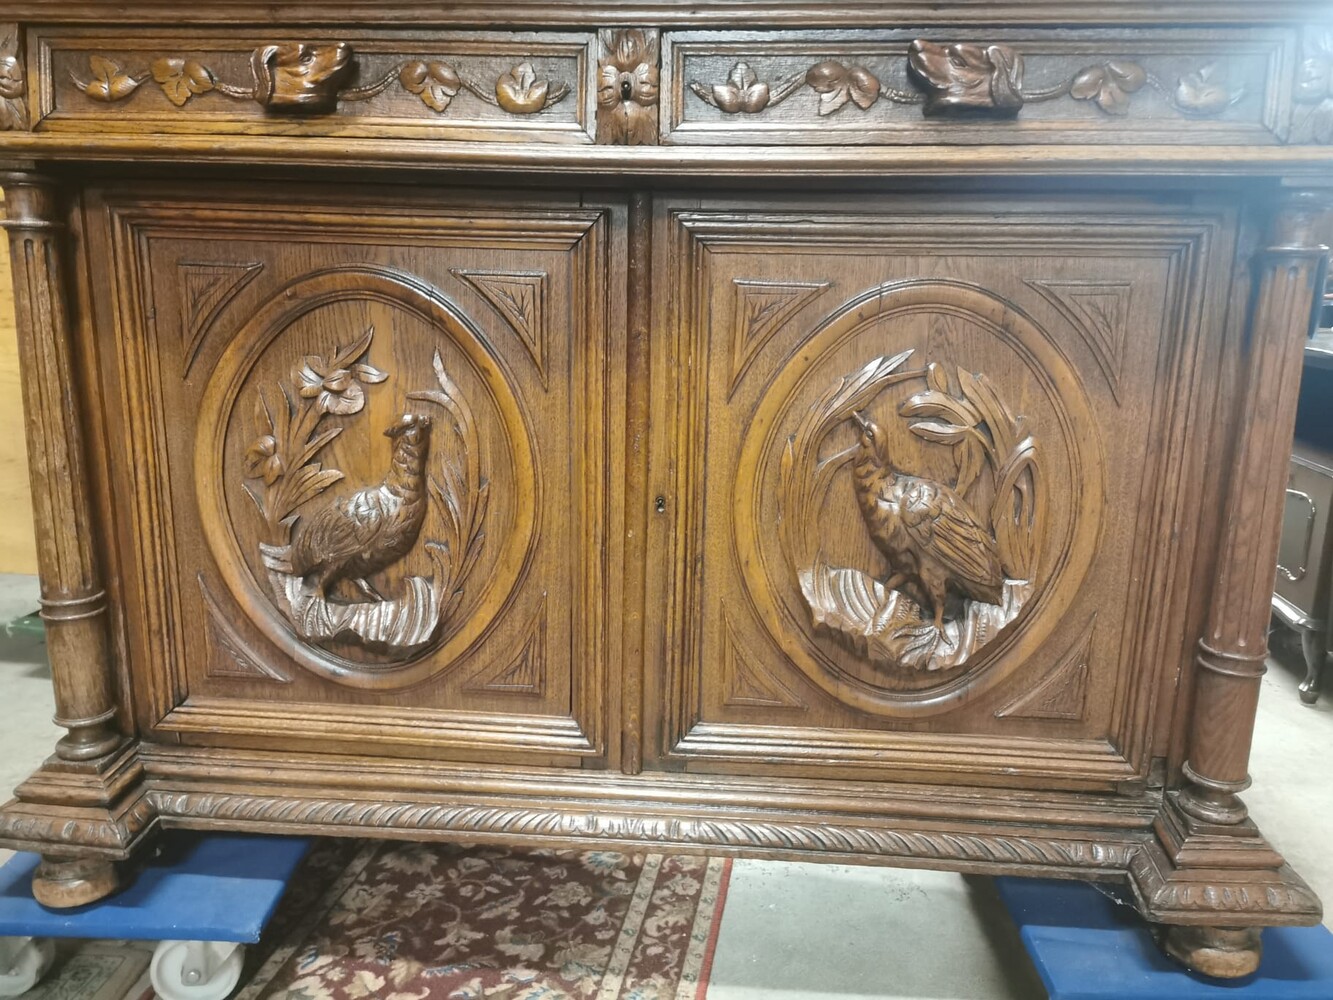  Exquisite French Oak Hunting Cabinet with Stained Glass Depicting Lions